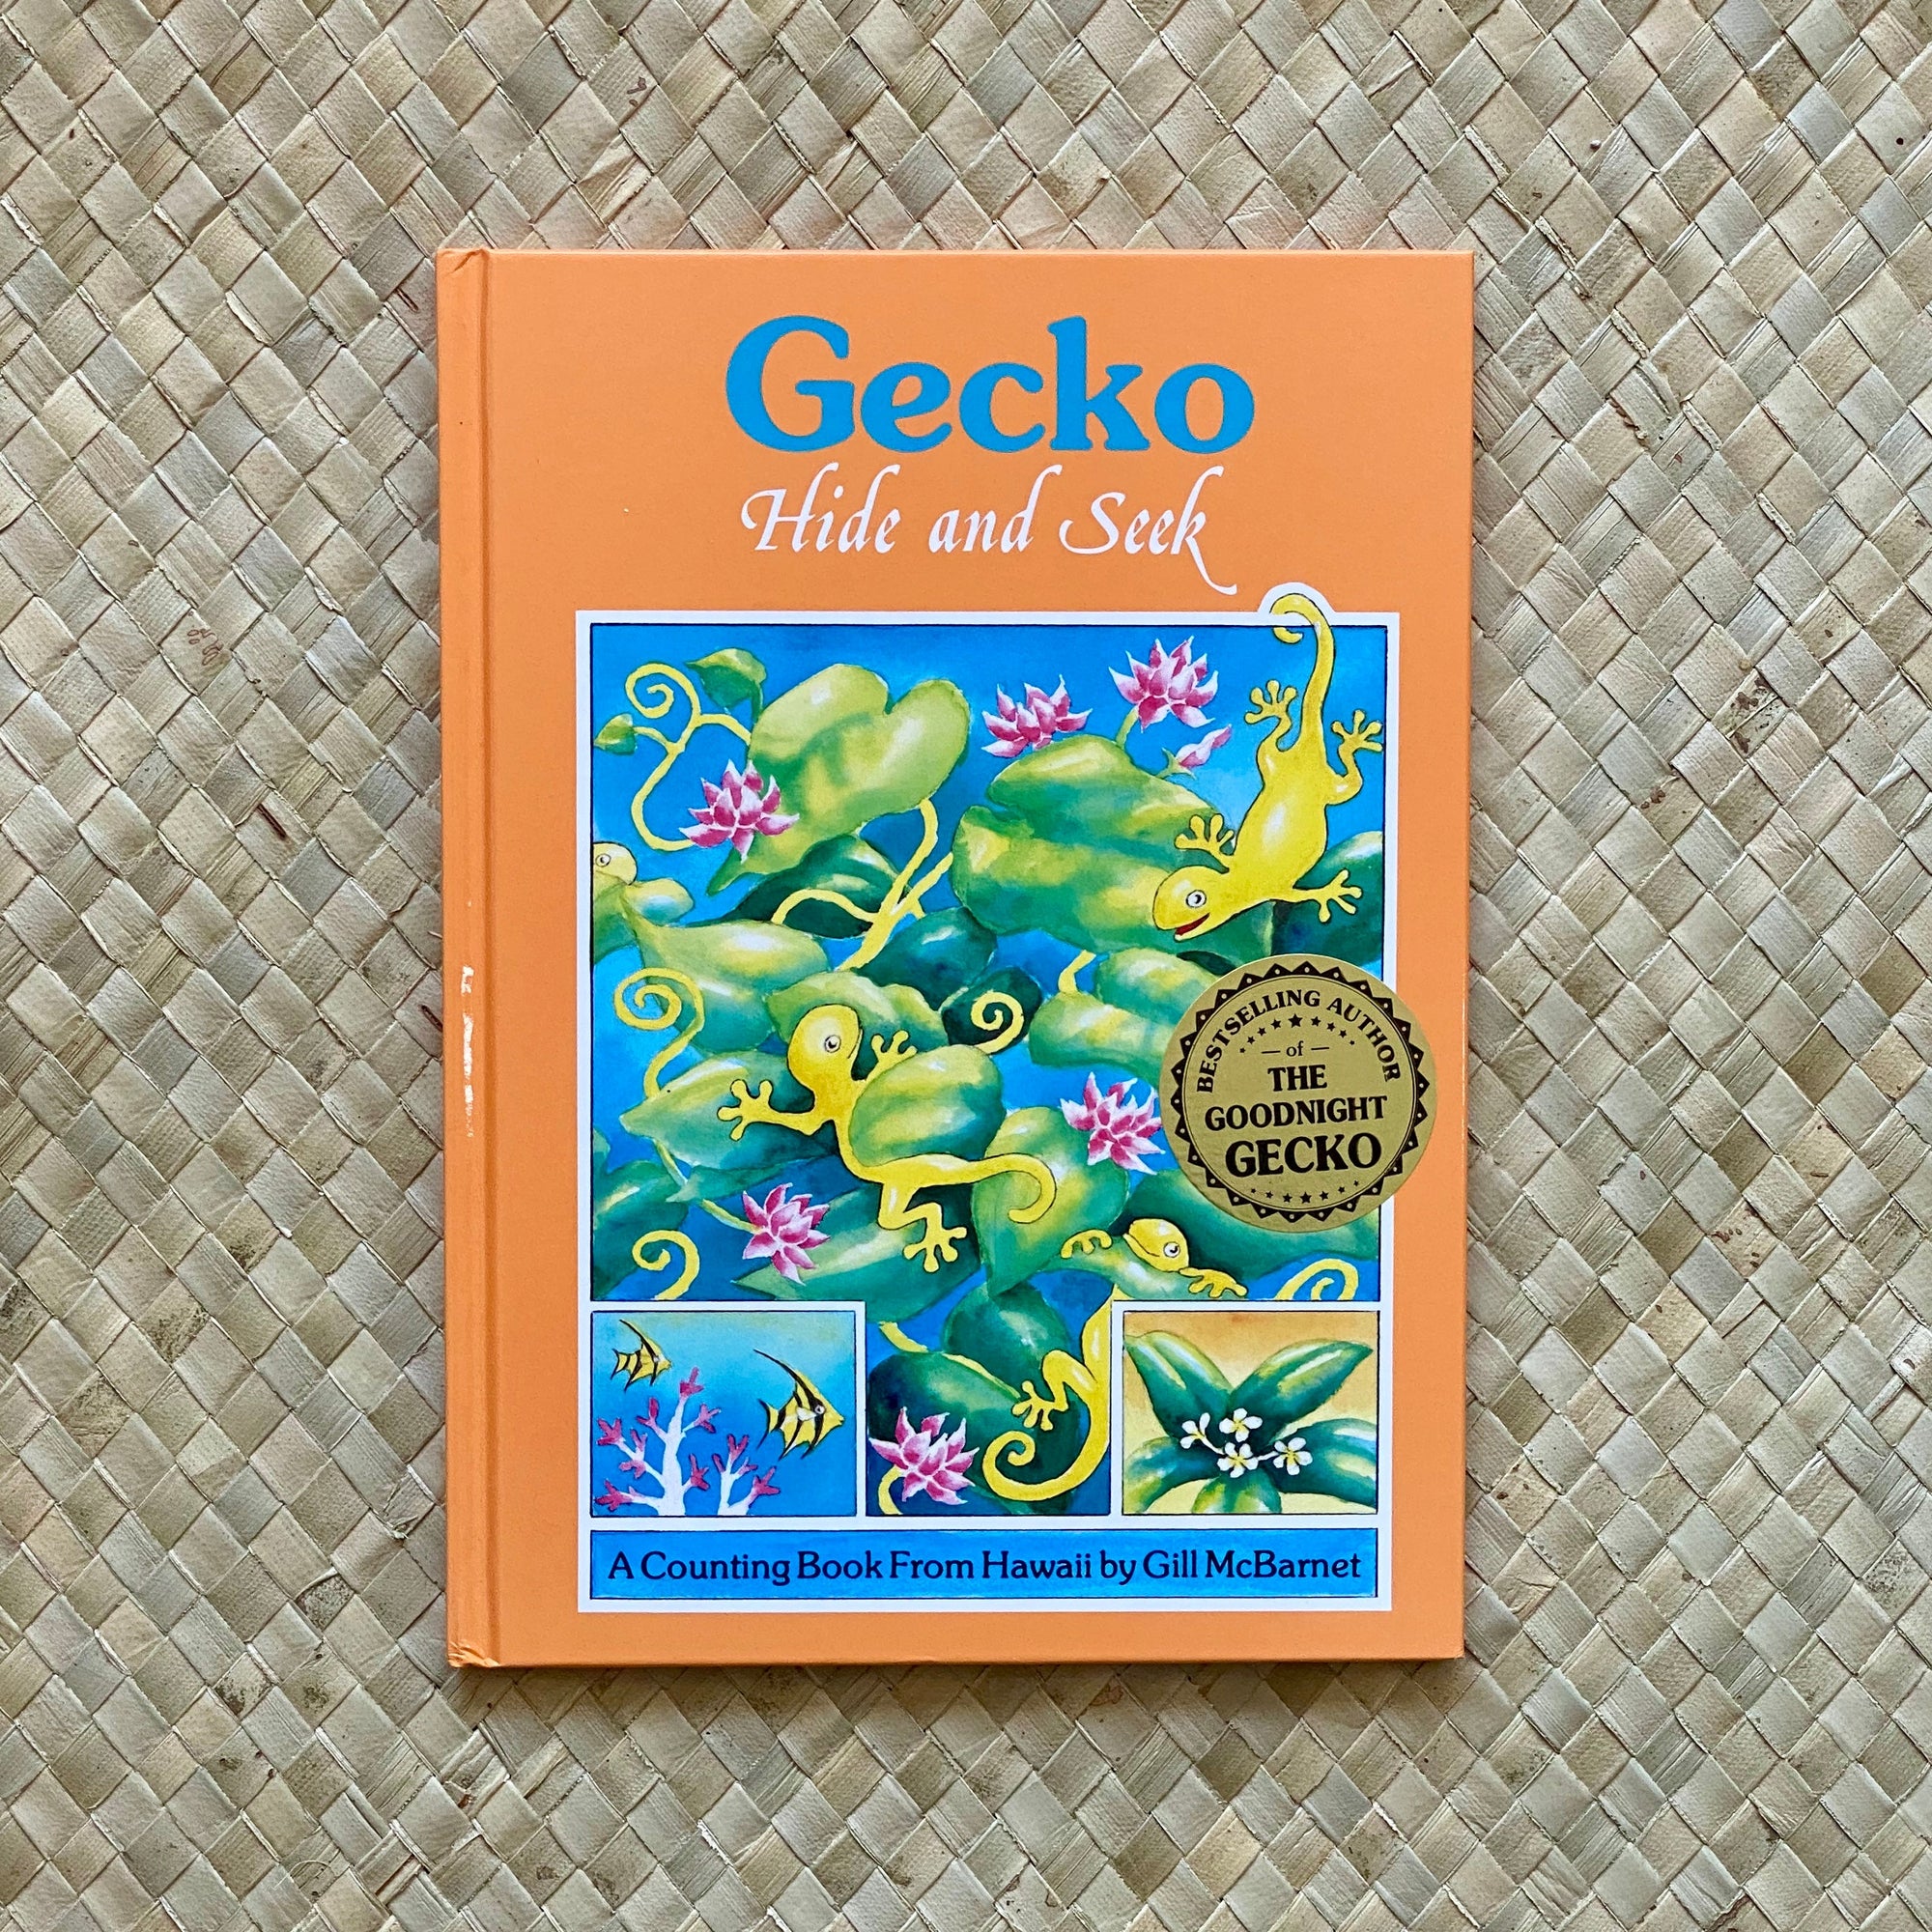 [SOLD OUT] Imperfect - Gecko Hide and Seek